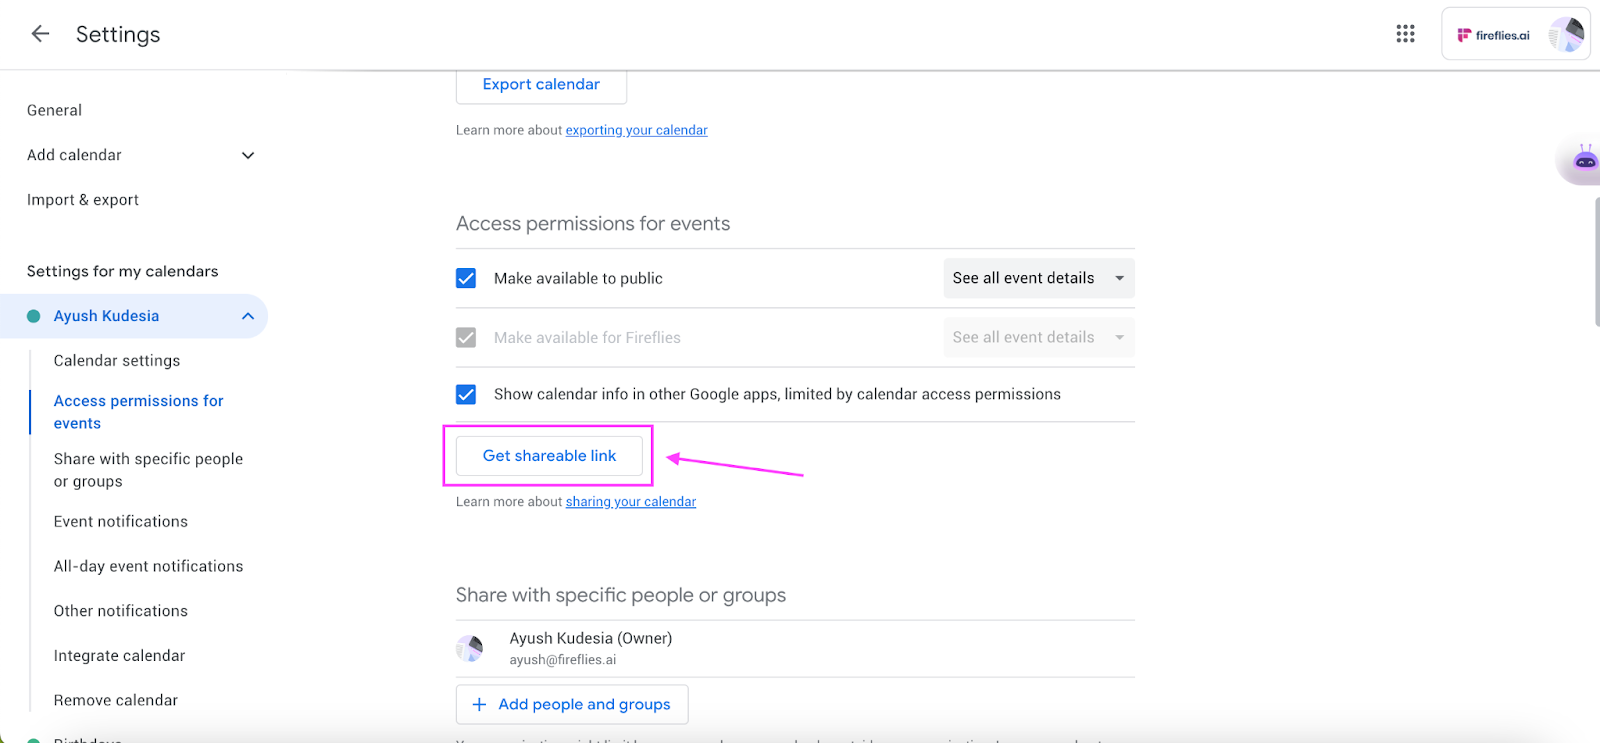 How to Embed Google Calendar in Notion with a public Google Calendar link